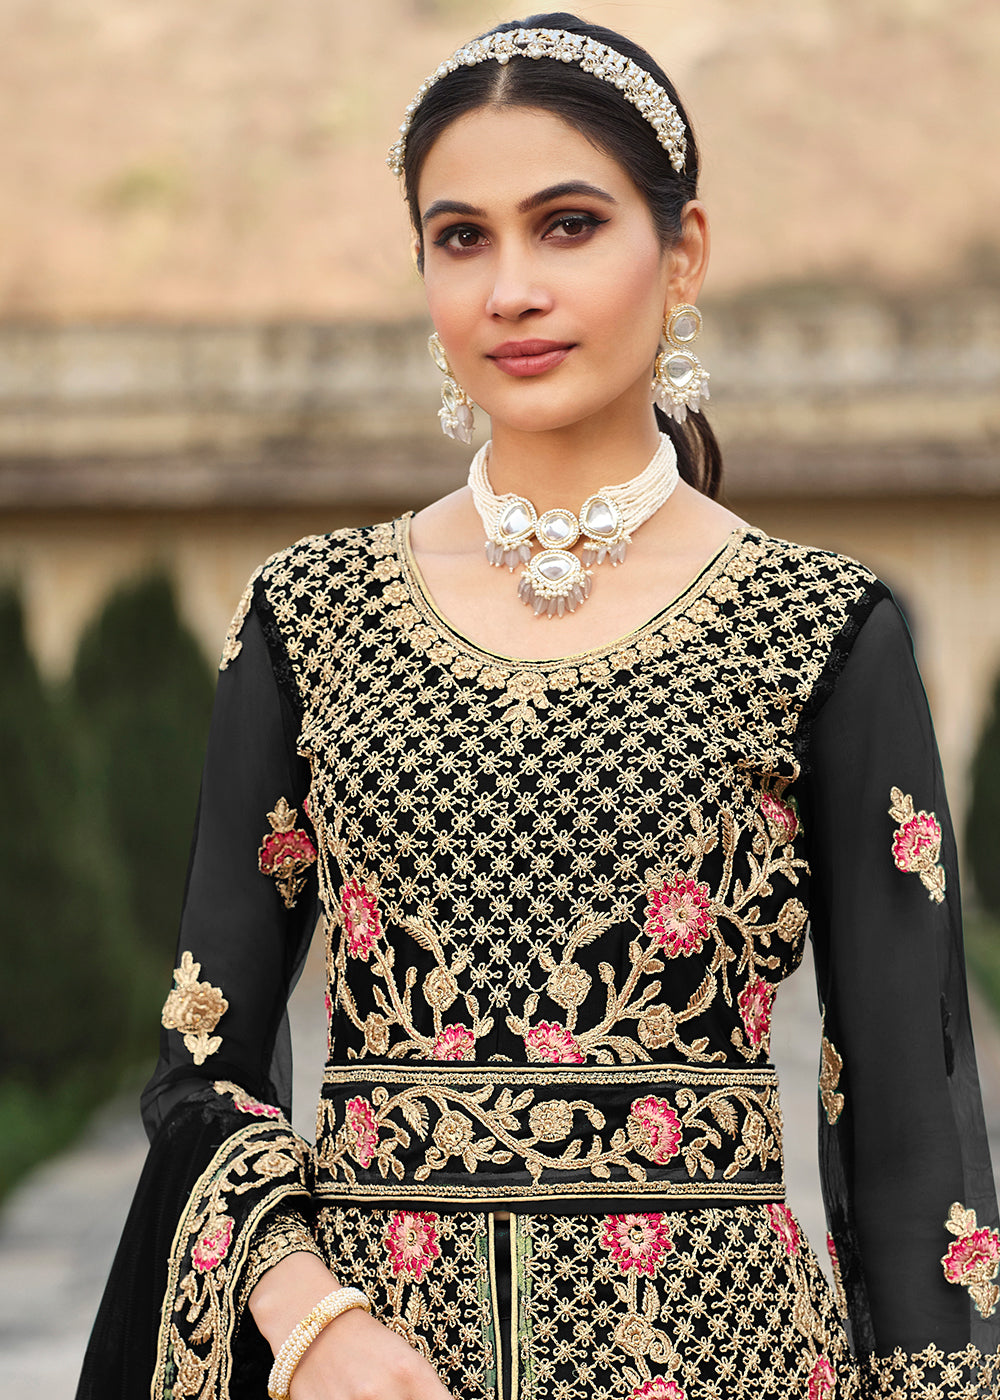 Buy Now Special Cord & Stone Work Black Slit Style Anarkali Suit Online in USA, UK, Australia, New Zealand, Canada, Italy & Worldwide at Empress Clothing. 